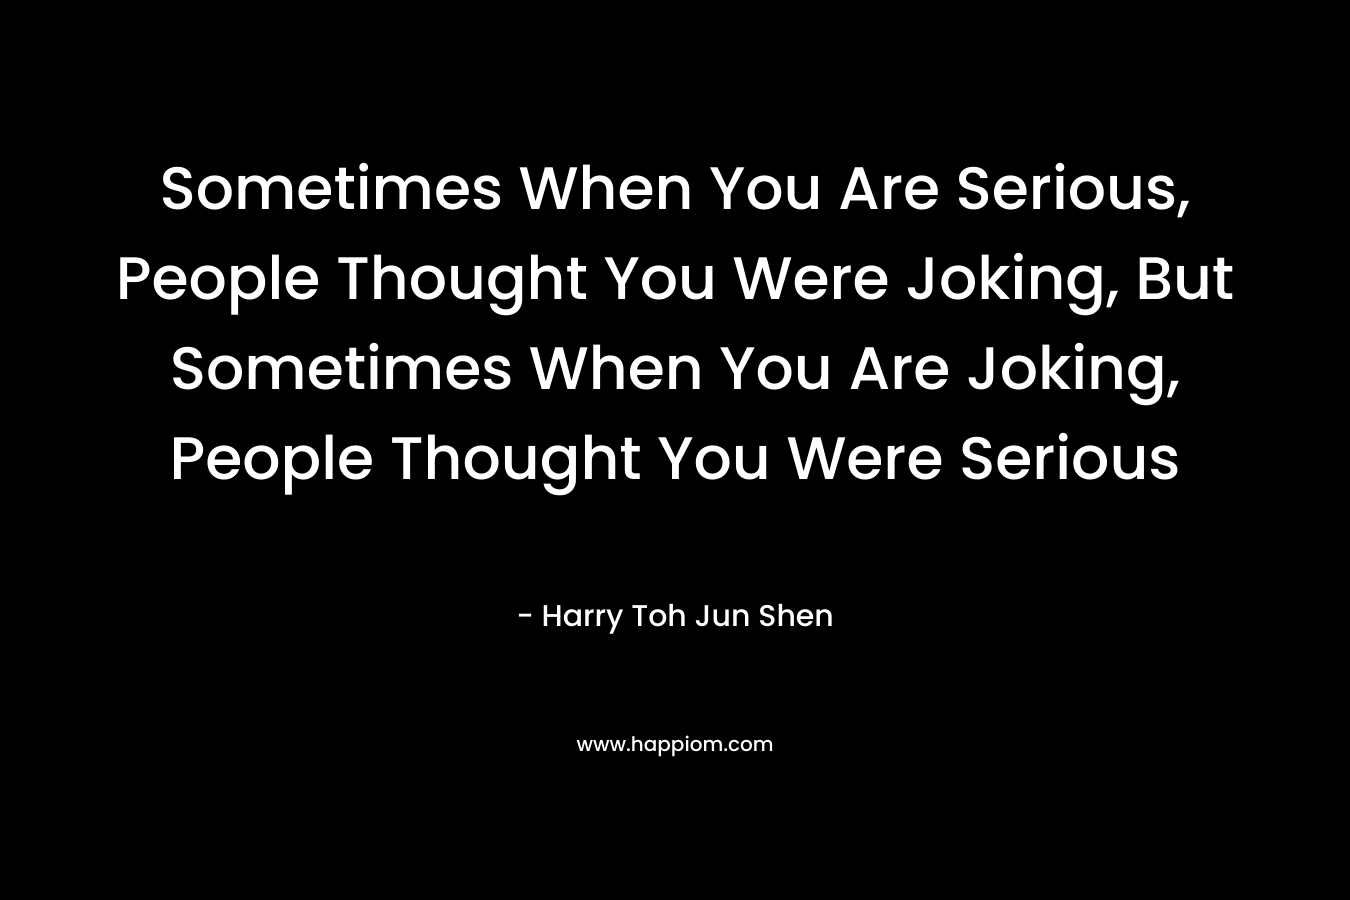 Sometimes When You Are Serious, People Thought You Were Joking, But Sometimes When You Are Joking, People Thought You Were Serious